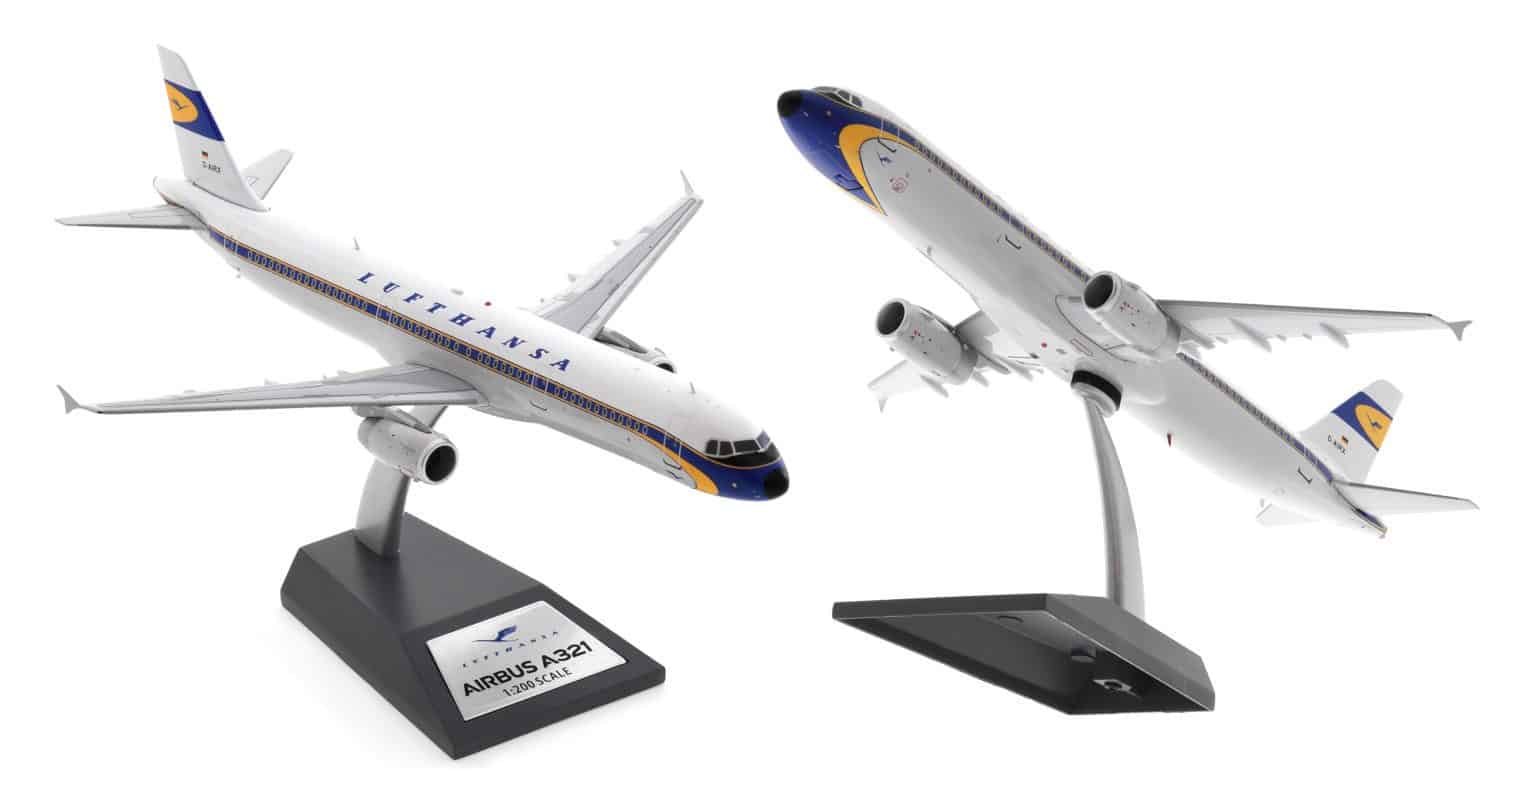 Image of model on display stand, JFox JF-A321-027 - 1/200 scale diecast model Airbus A321-100, registration D-AIRX in Lufthansa's retro livery